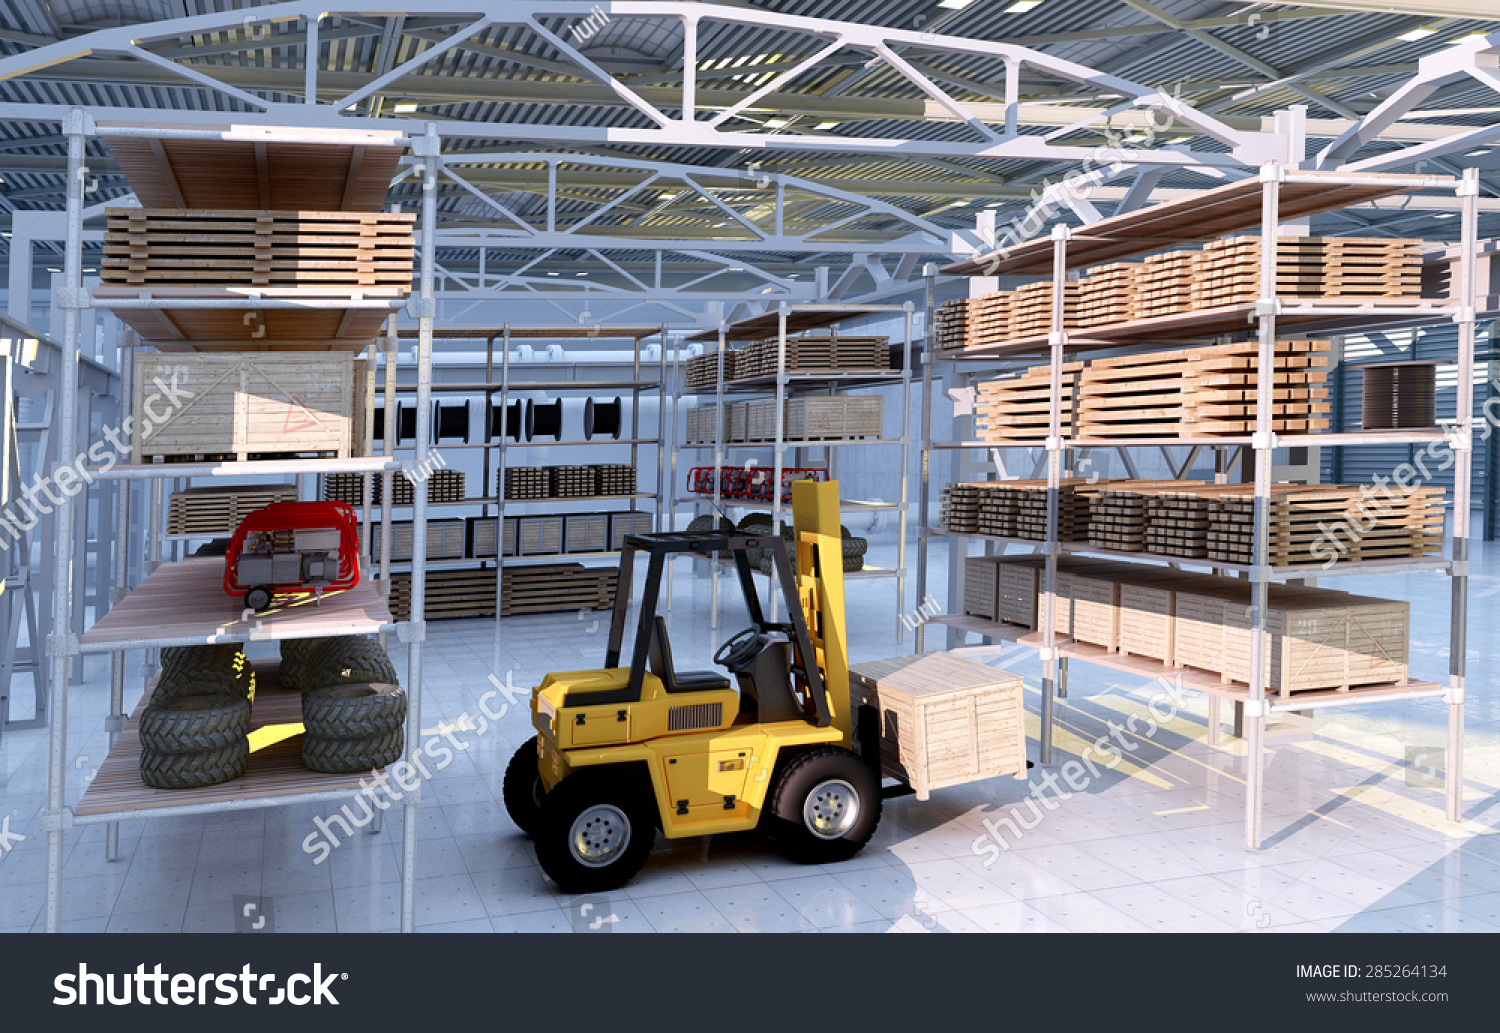 Forklift among the materials in the hangar. #285264134